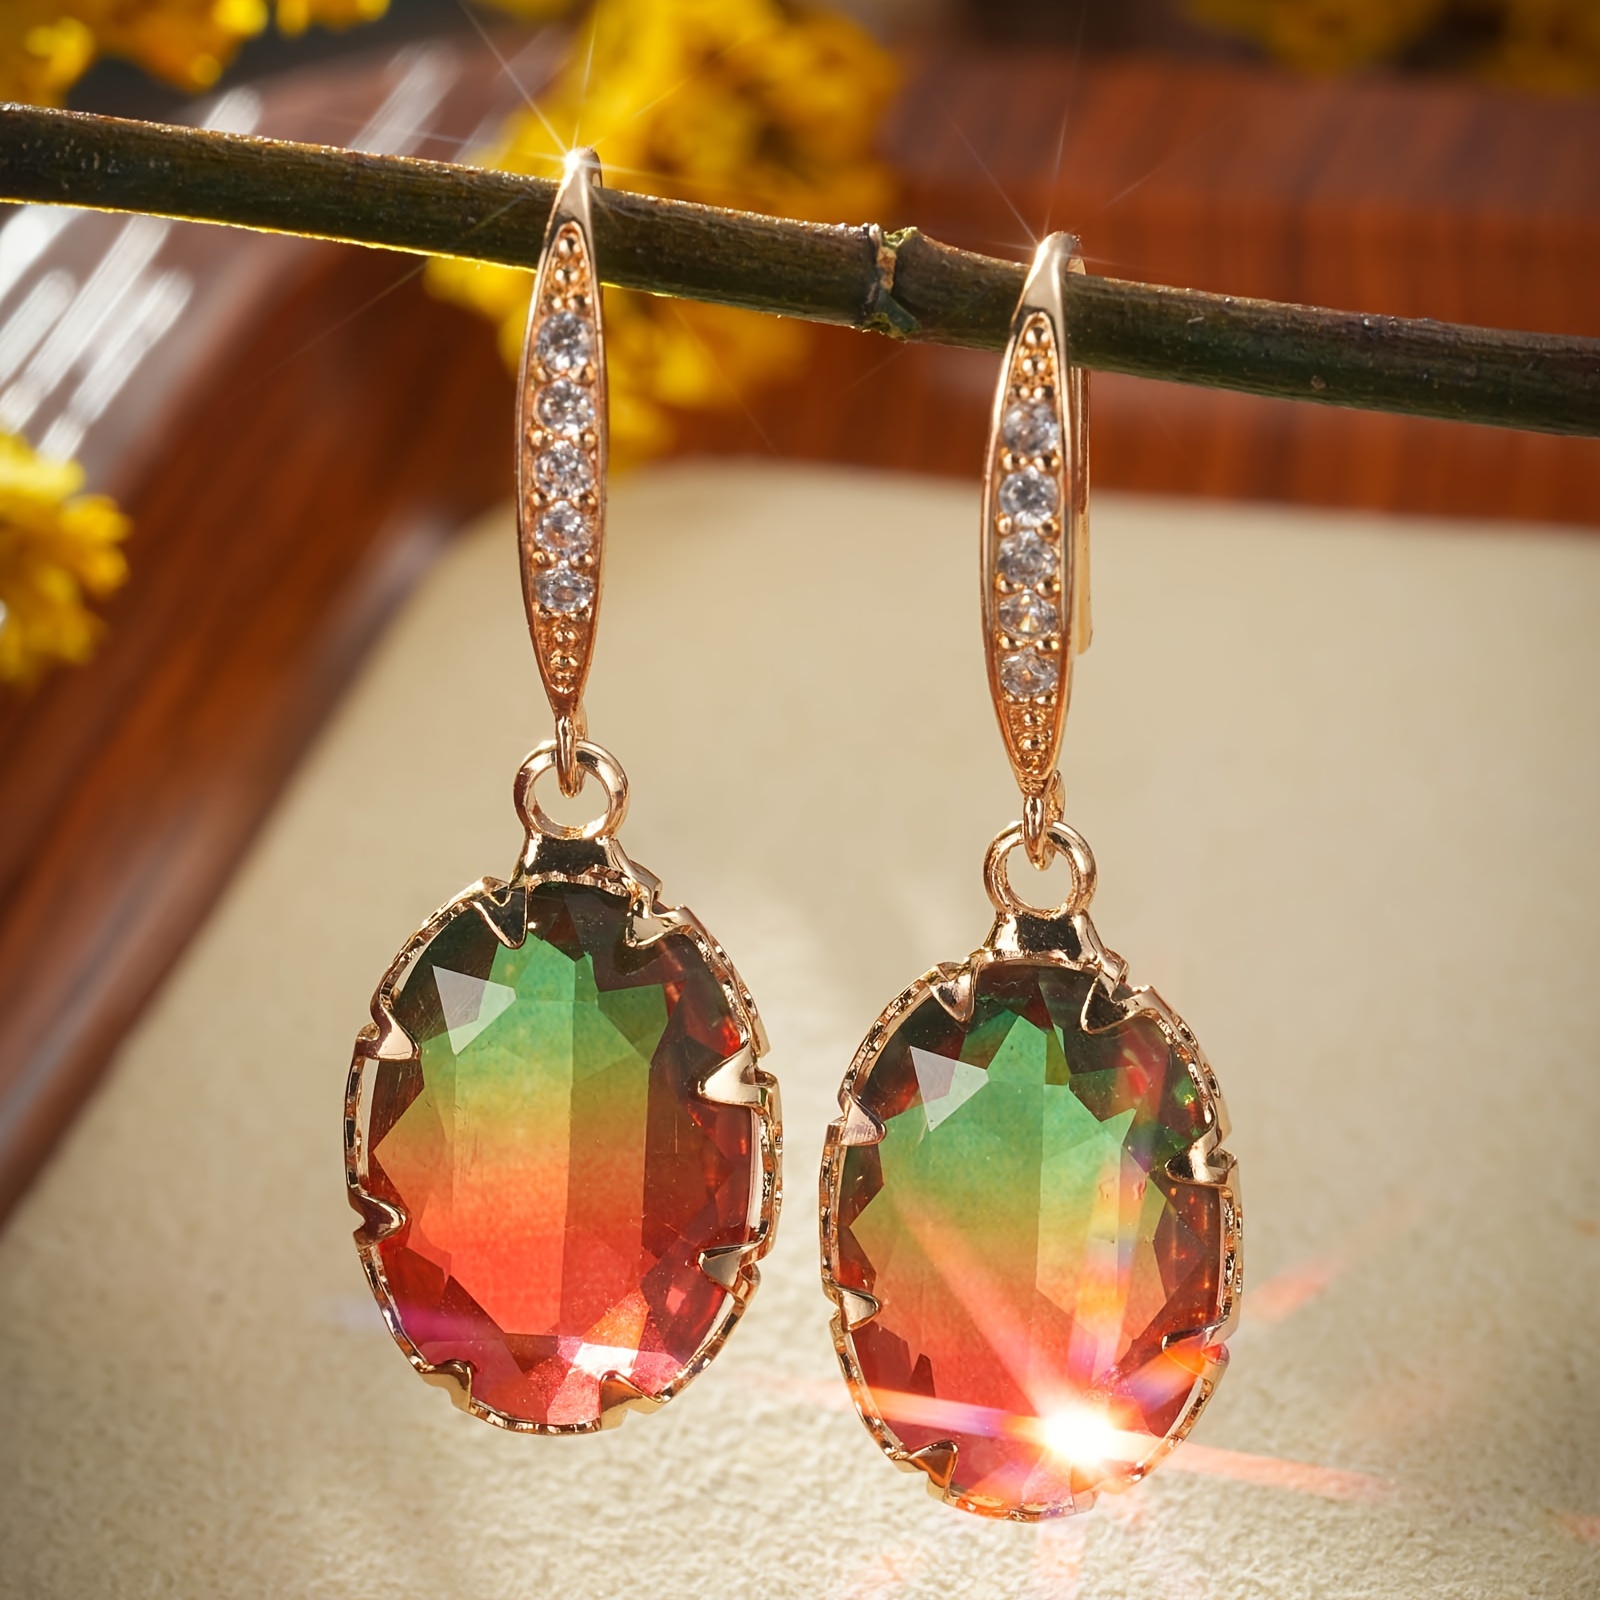 

Elegant Drop Earrings, Waterish Zirconia In Oval Shape, Gradient Color, Match Daily Outfits, Party Accessories, Dupes Luxury Jewelry